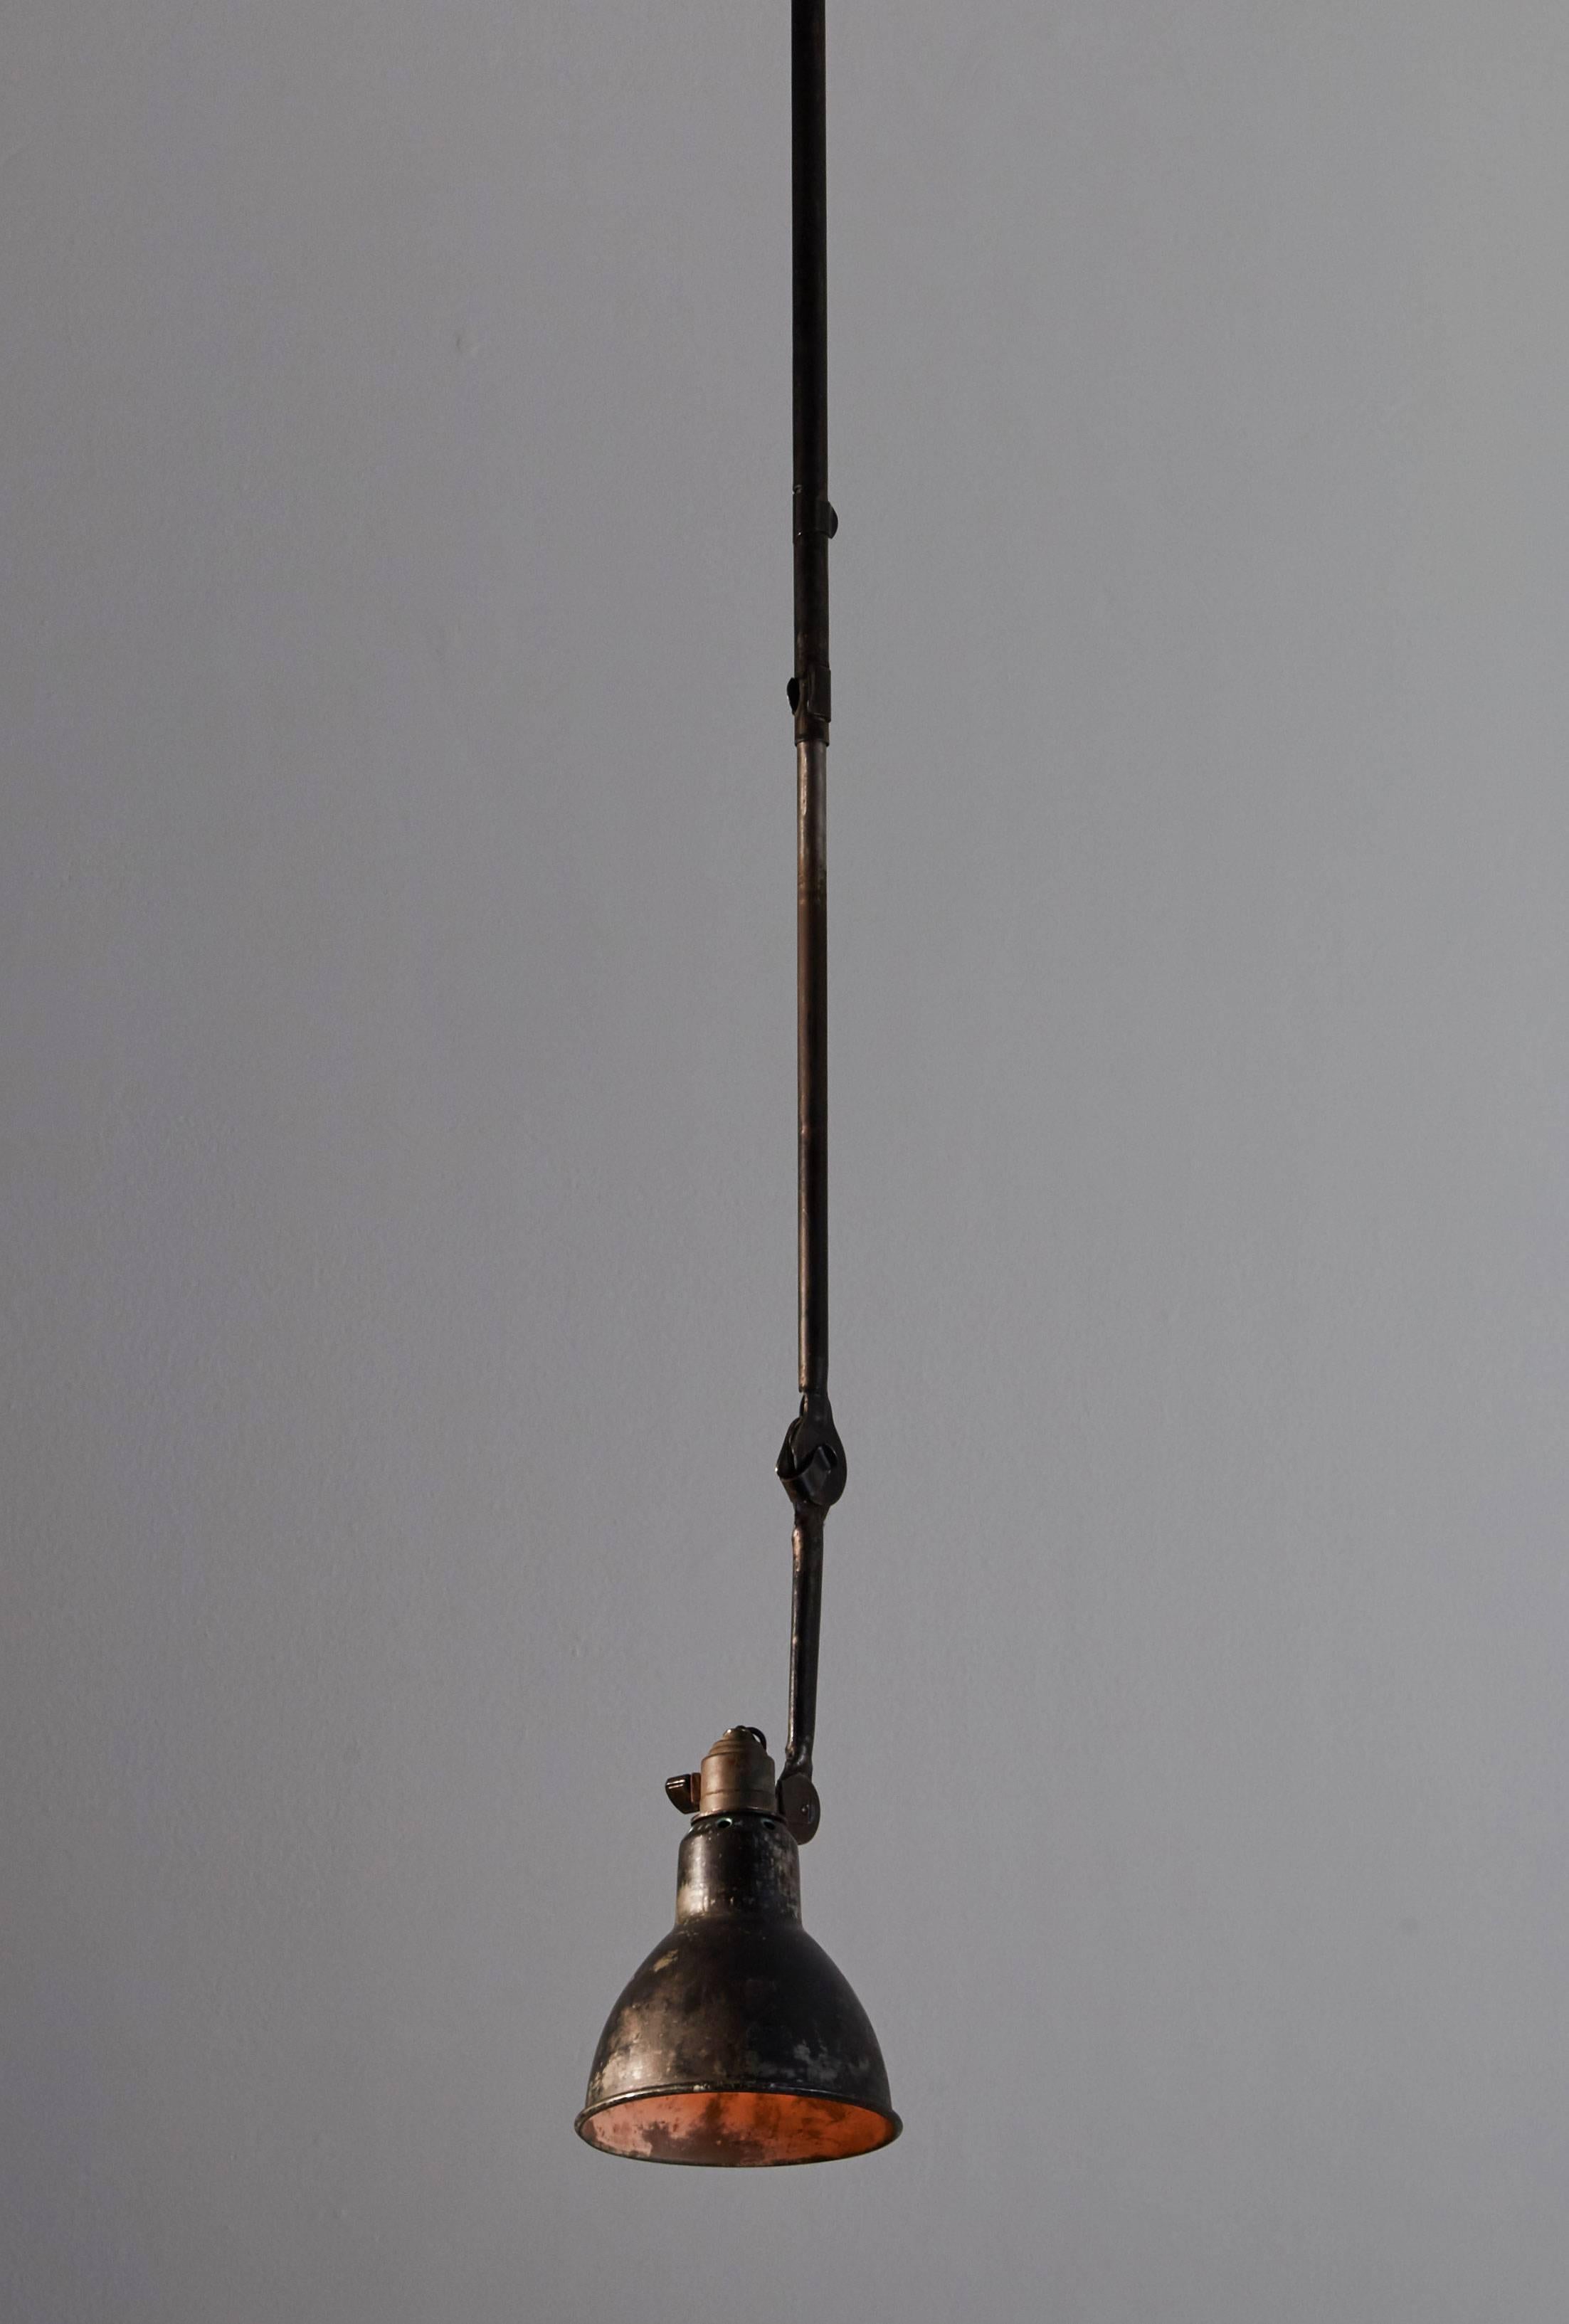 Patinated Model No. 302 Adjustable Ceiling Light by Gras Ravel